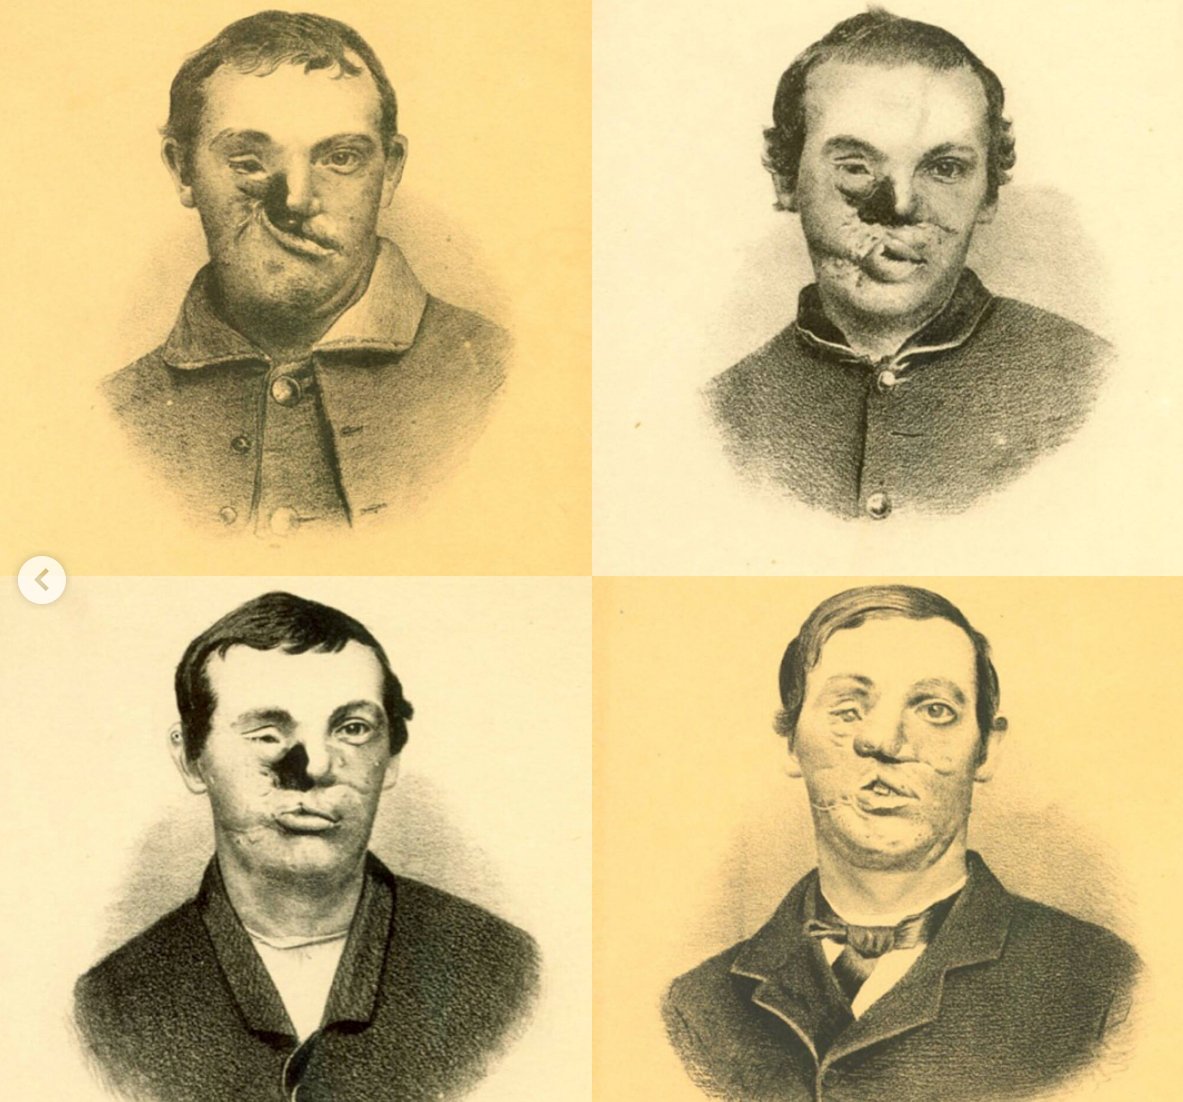 (4/8) With the help of a dentist named Thomas B. Gunning, Buck was able to reconstruct parts of Burgan’s face using rudimentary skin grafts and flap techniques. Images:  @medicalmuseum